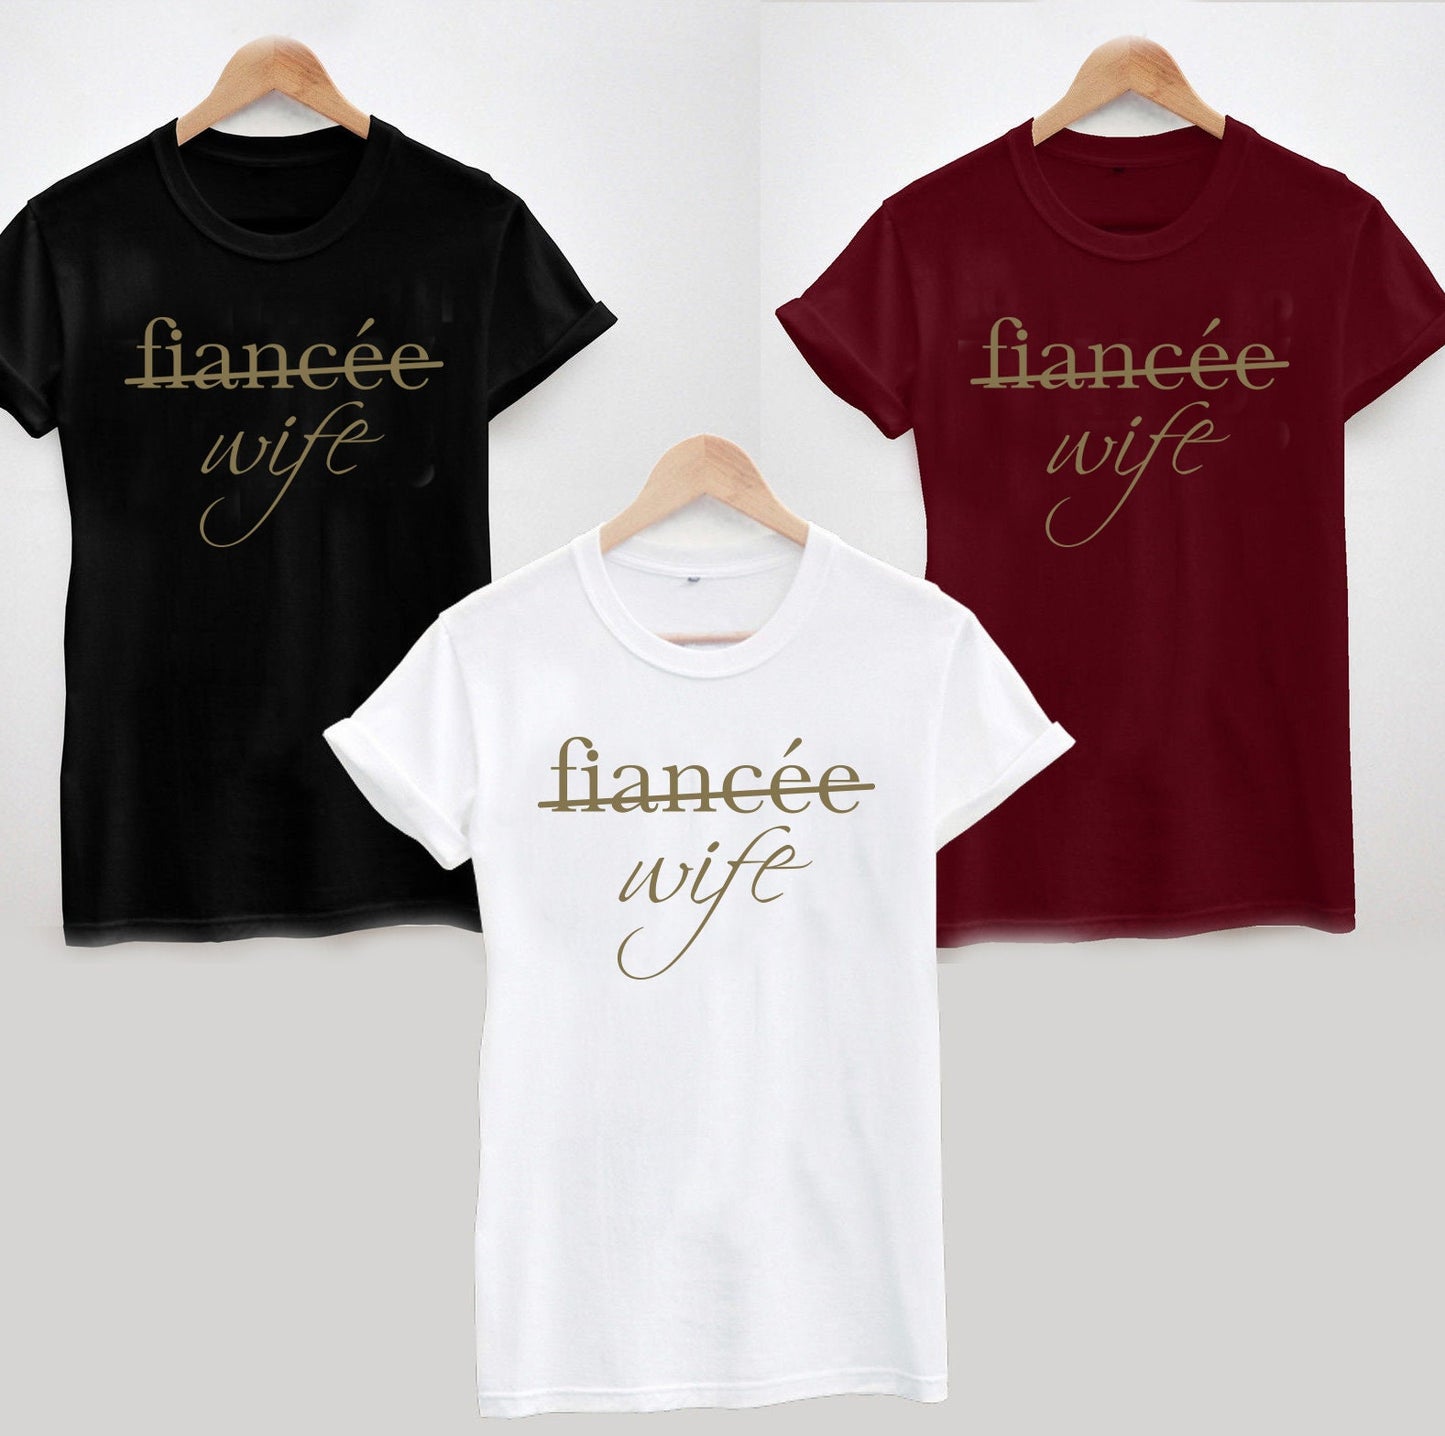 Fiance to Wife GOLD print T-Shirt, Ladies or Unisex Funny Cool Wedding Gift